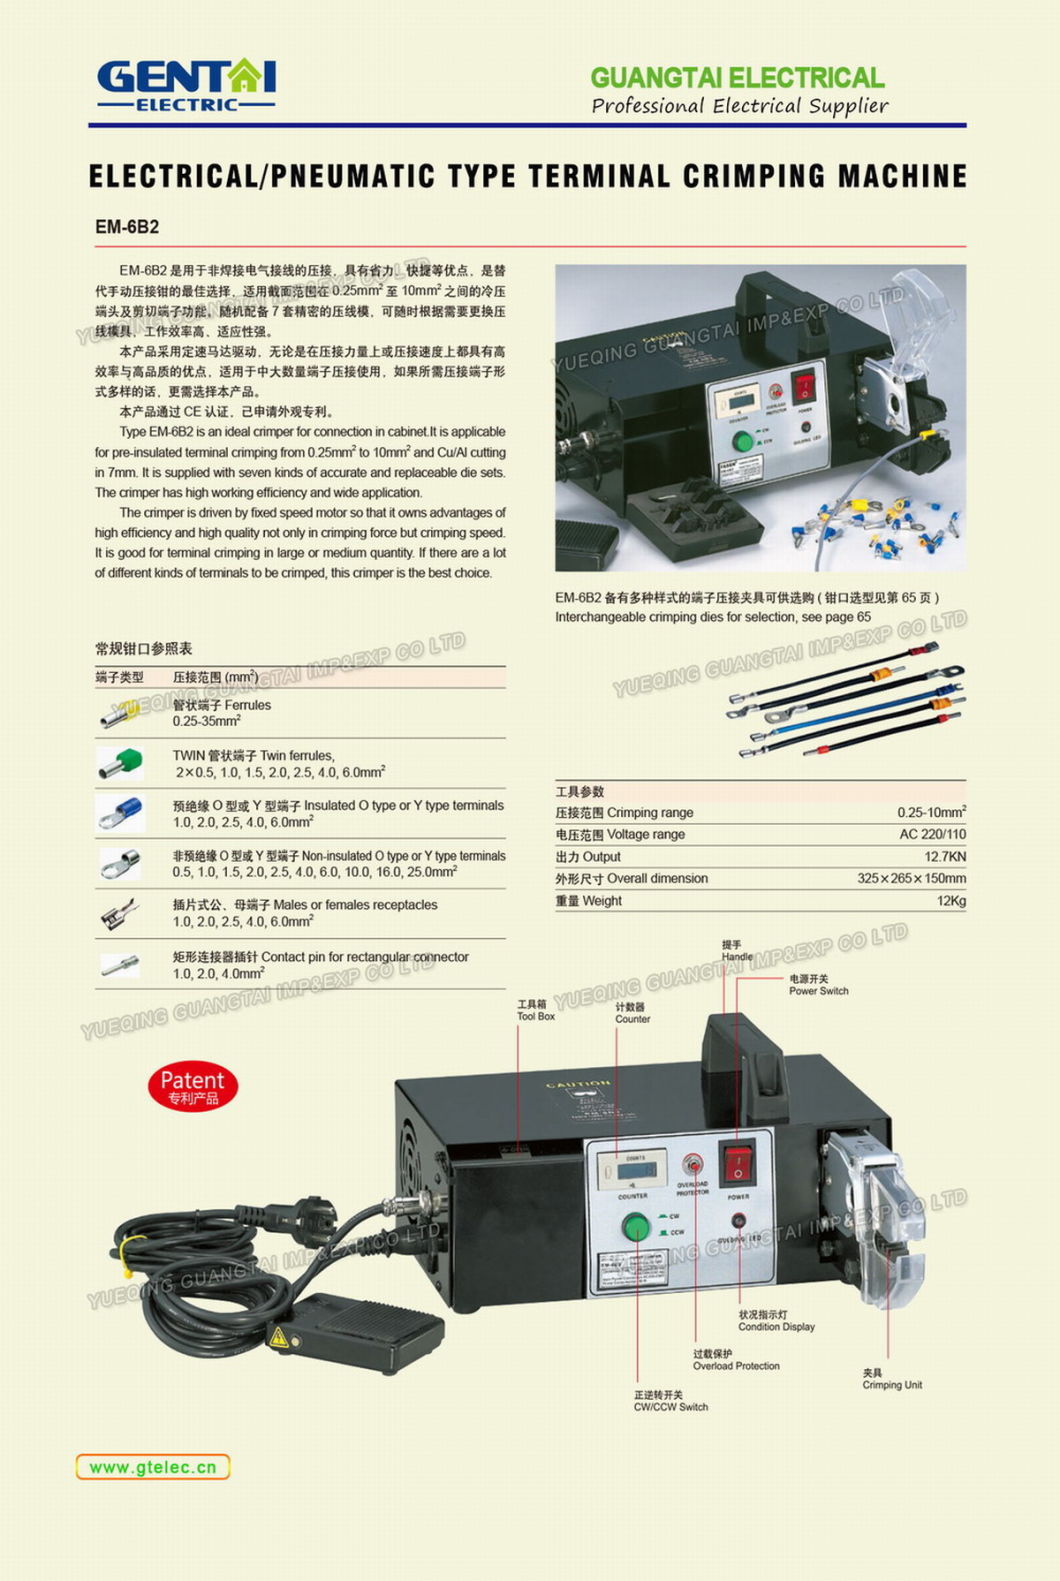 Pneumatic Type Terminal Crimping Machine for Different Cable Lugs